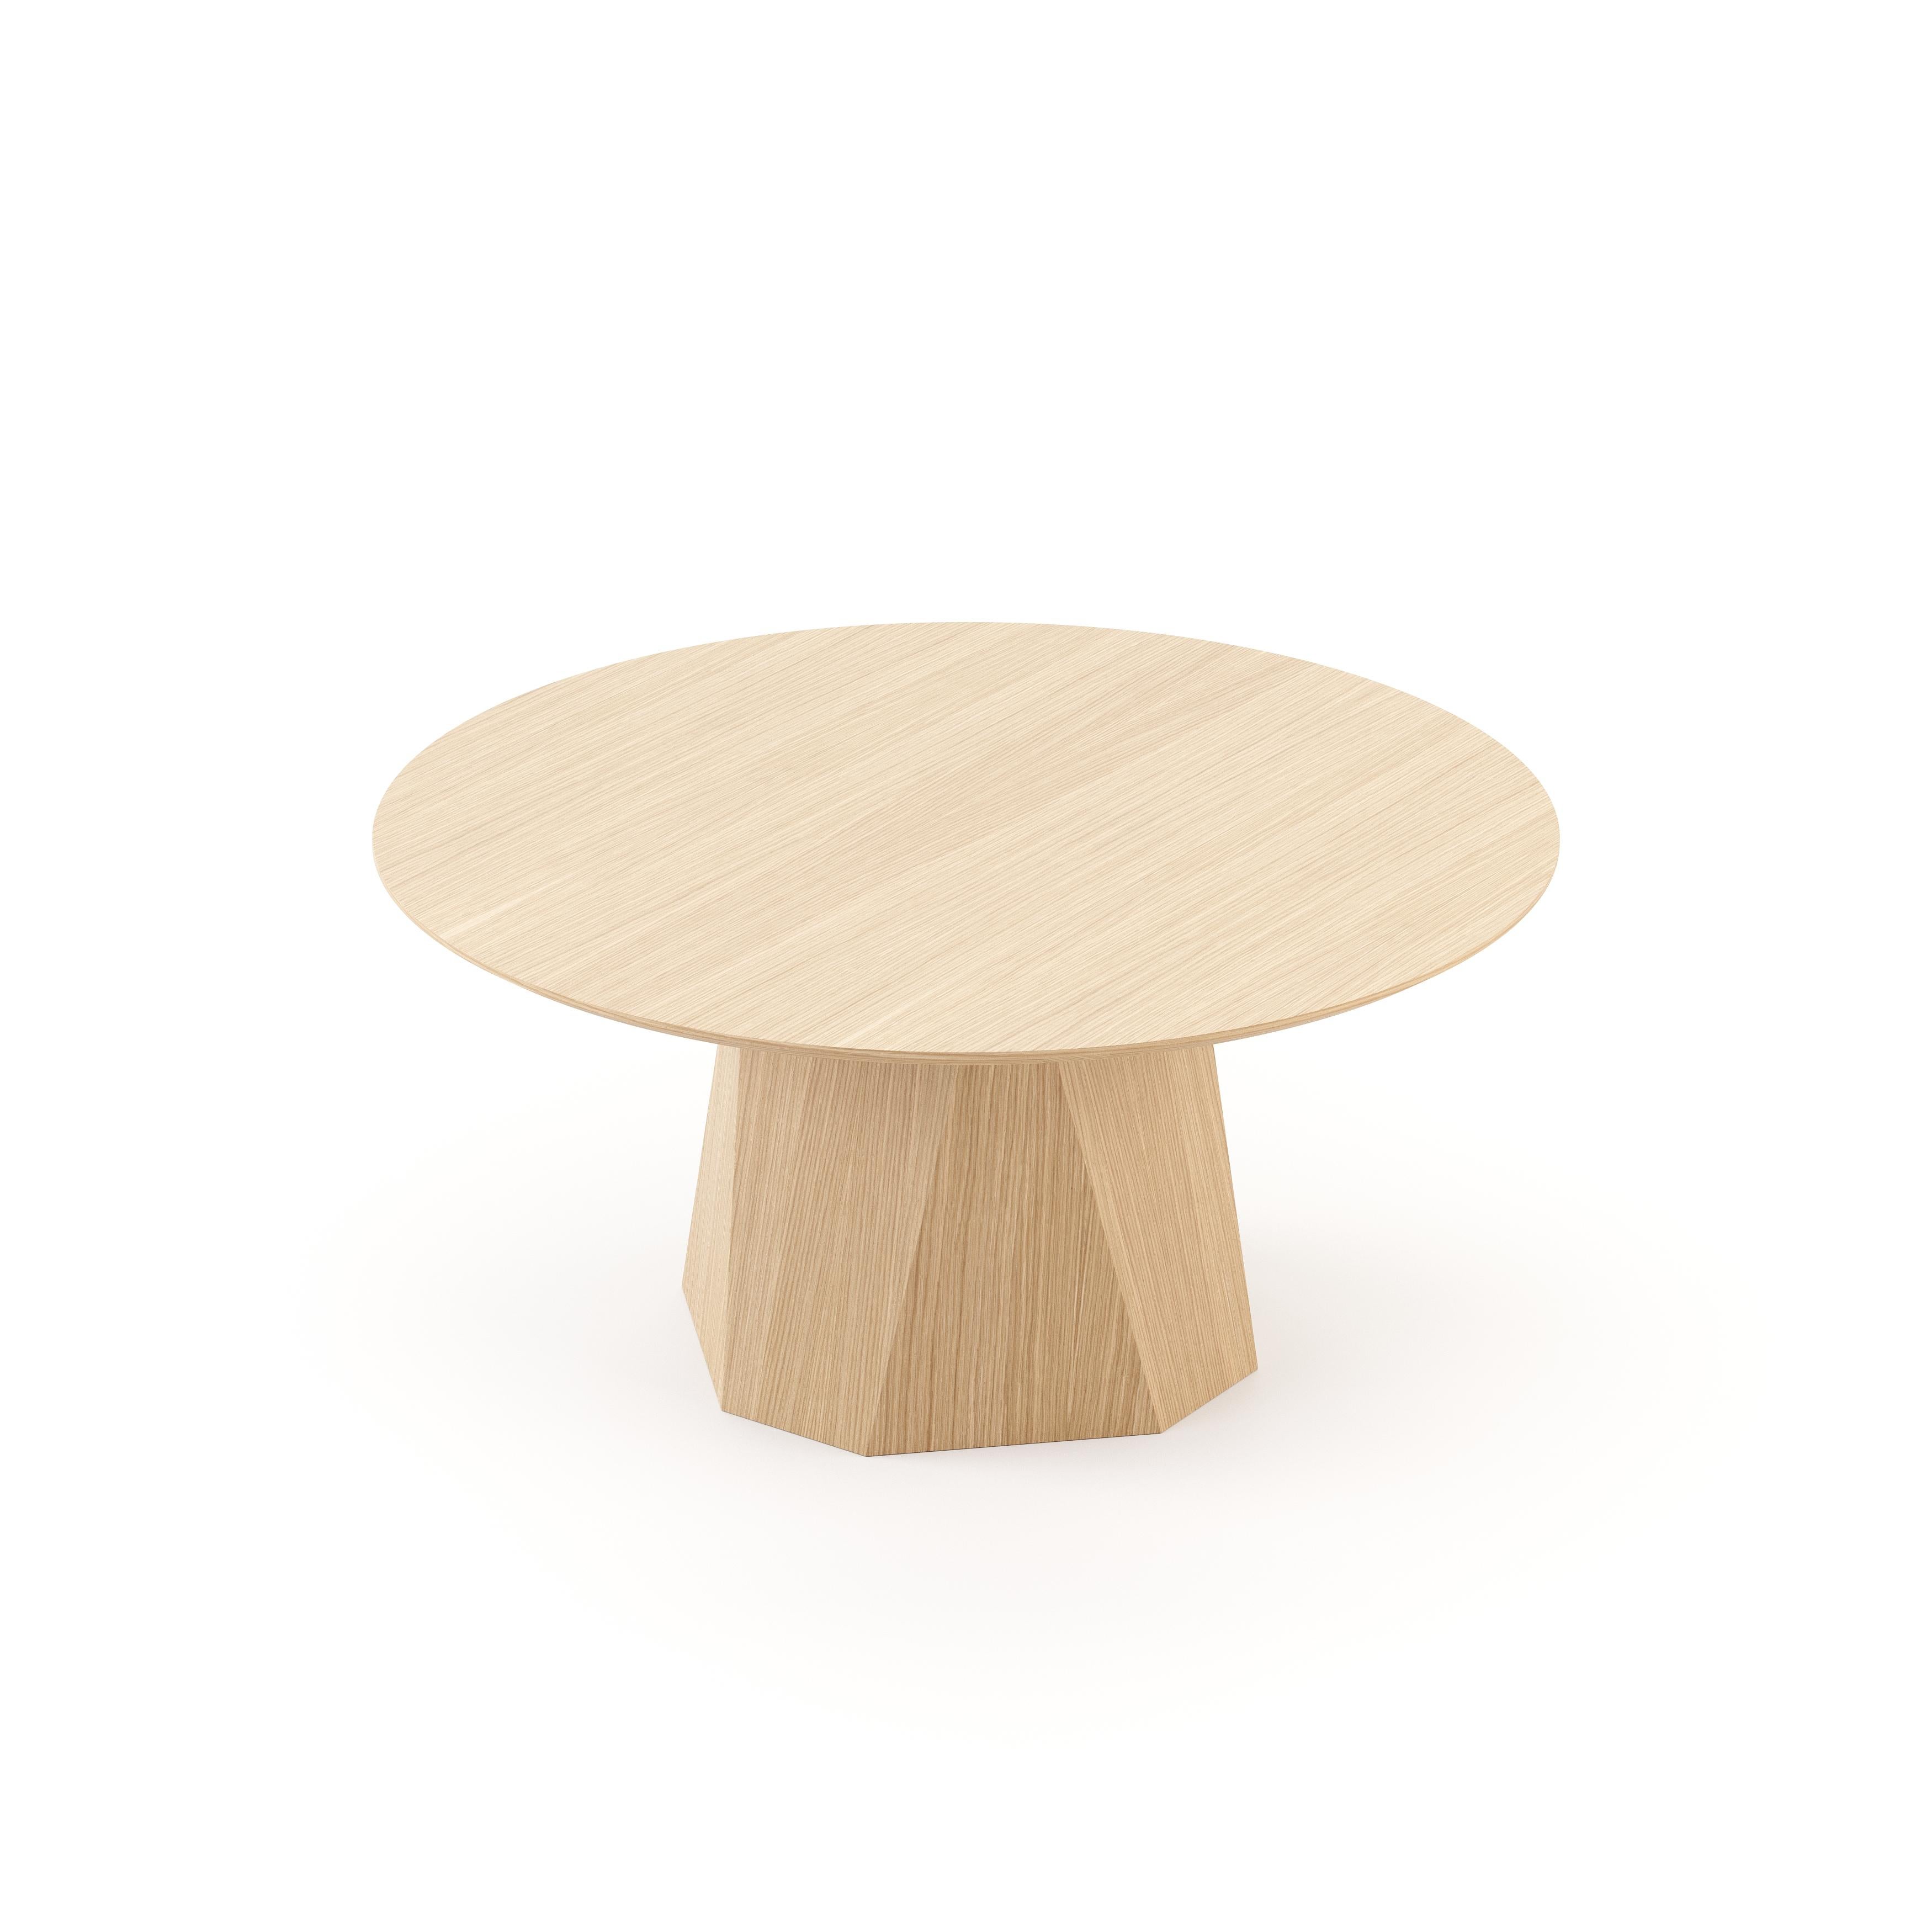 Portuguese Modern Olivia Dining Table Made with Oak, Handmade by Stylish Club For Sale